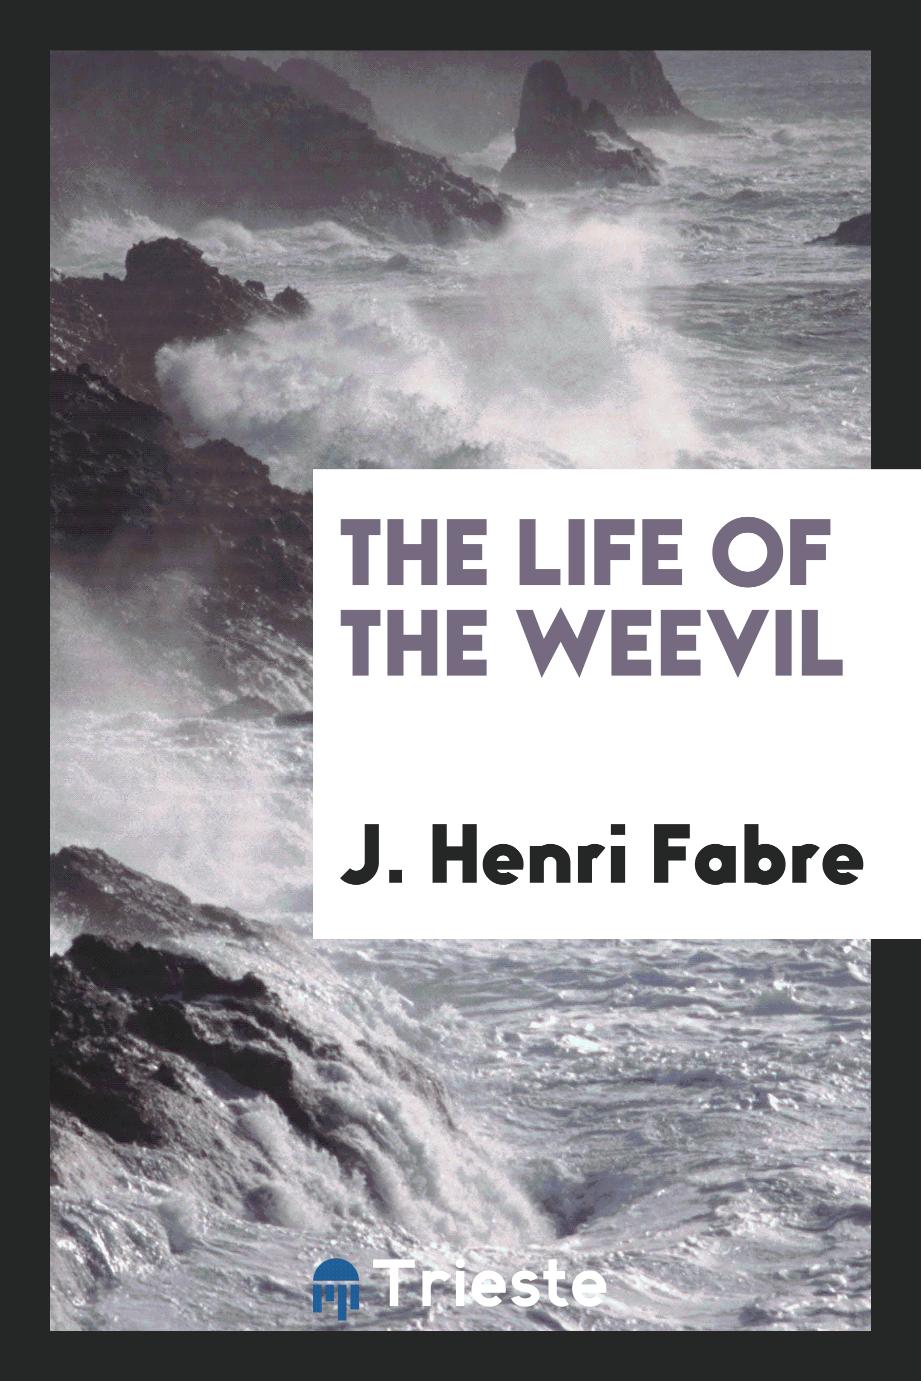 The life of the weevil